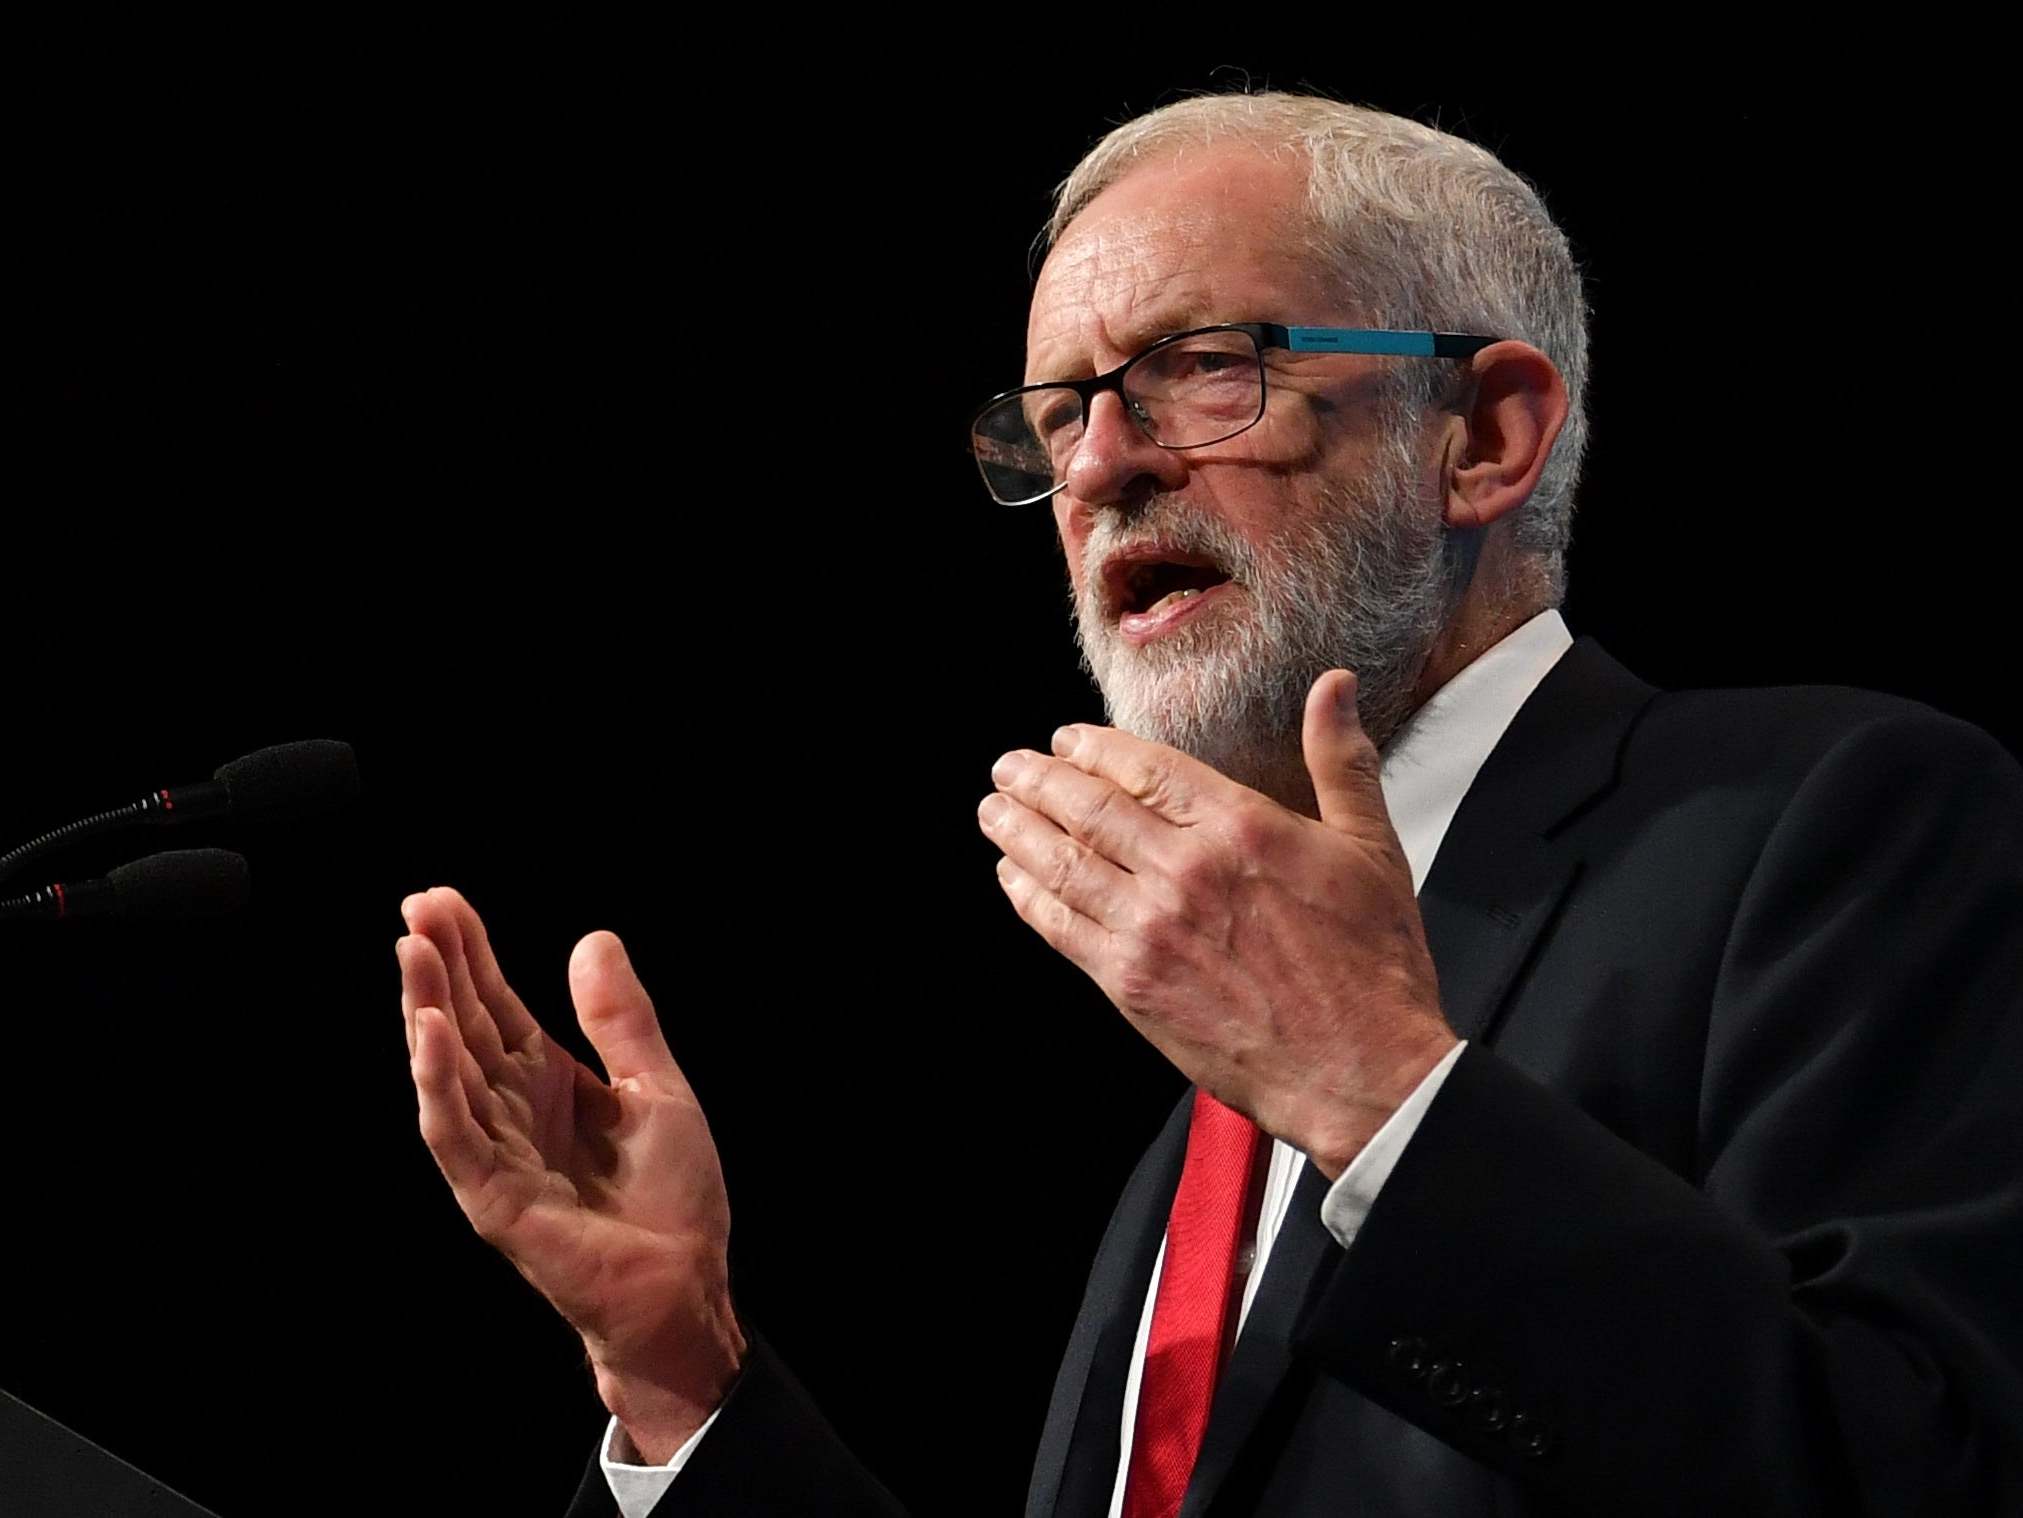 Even for Corbyn, trying to restore Clause IV is a step too far – for now